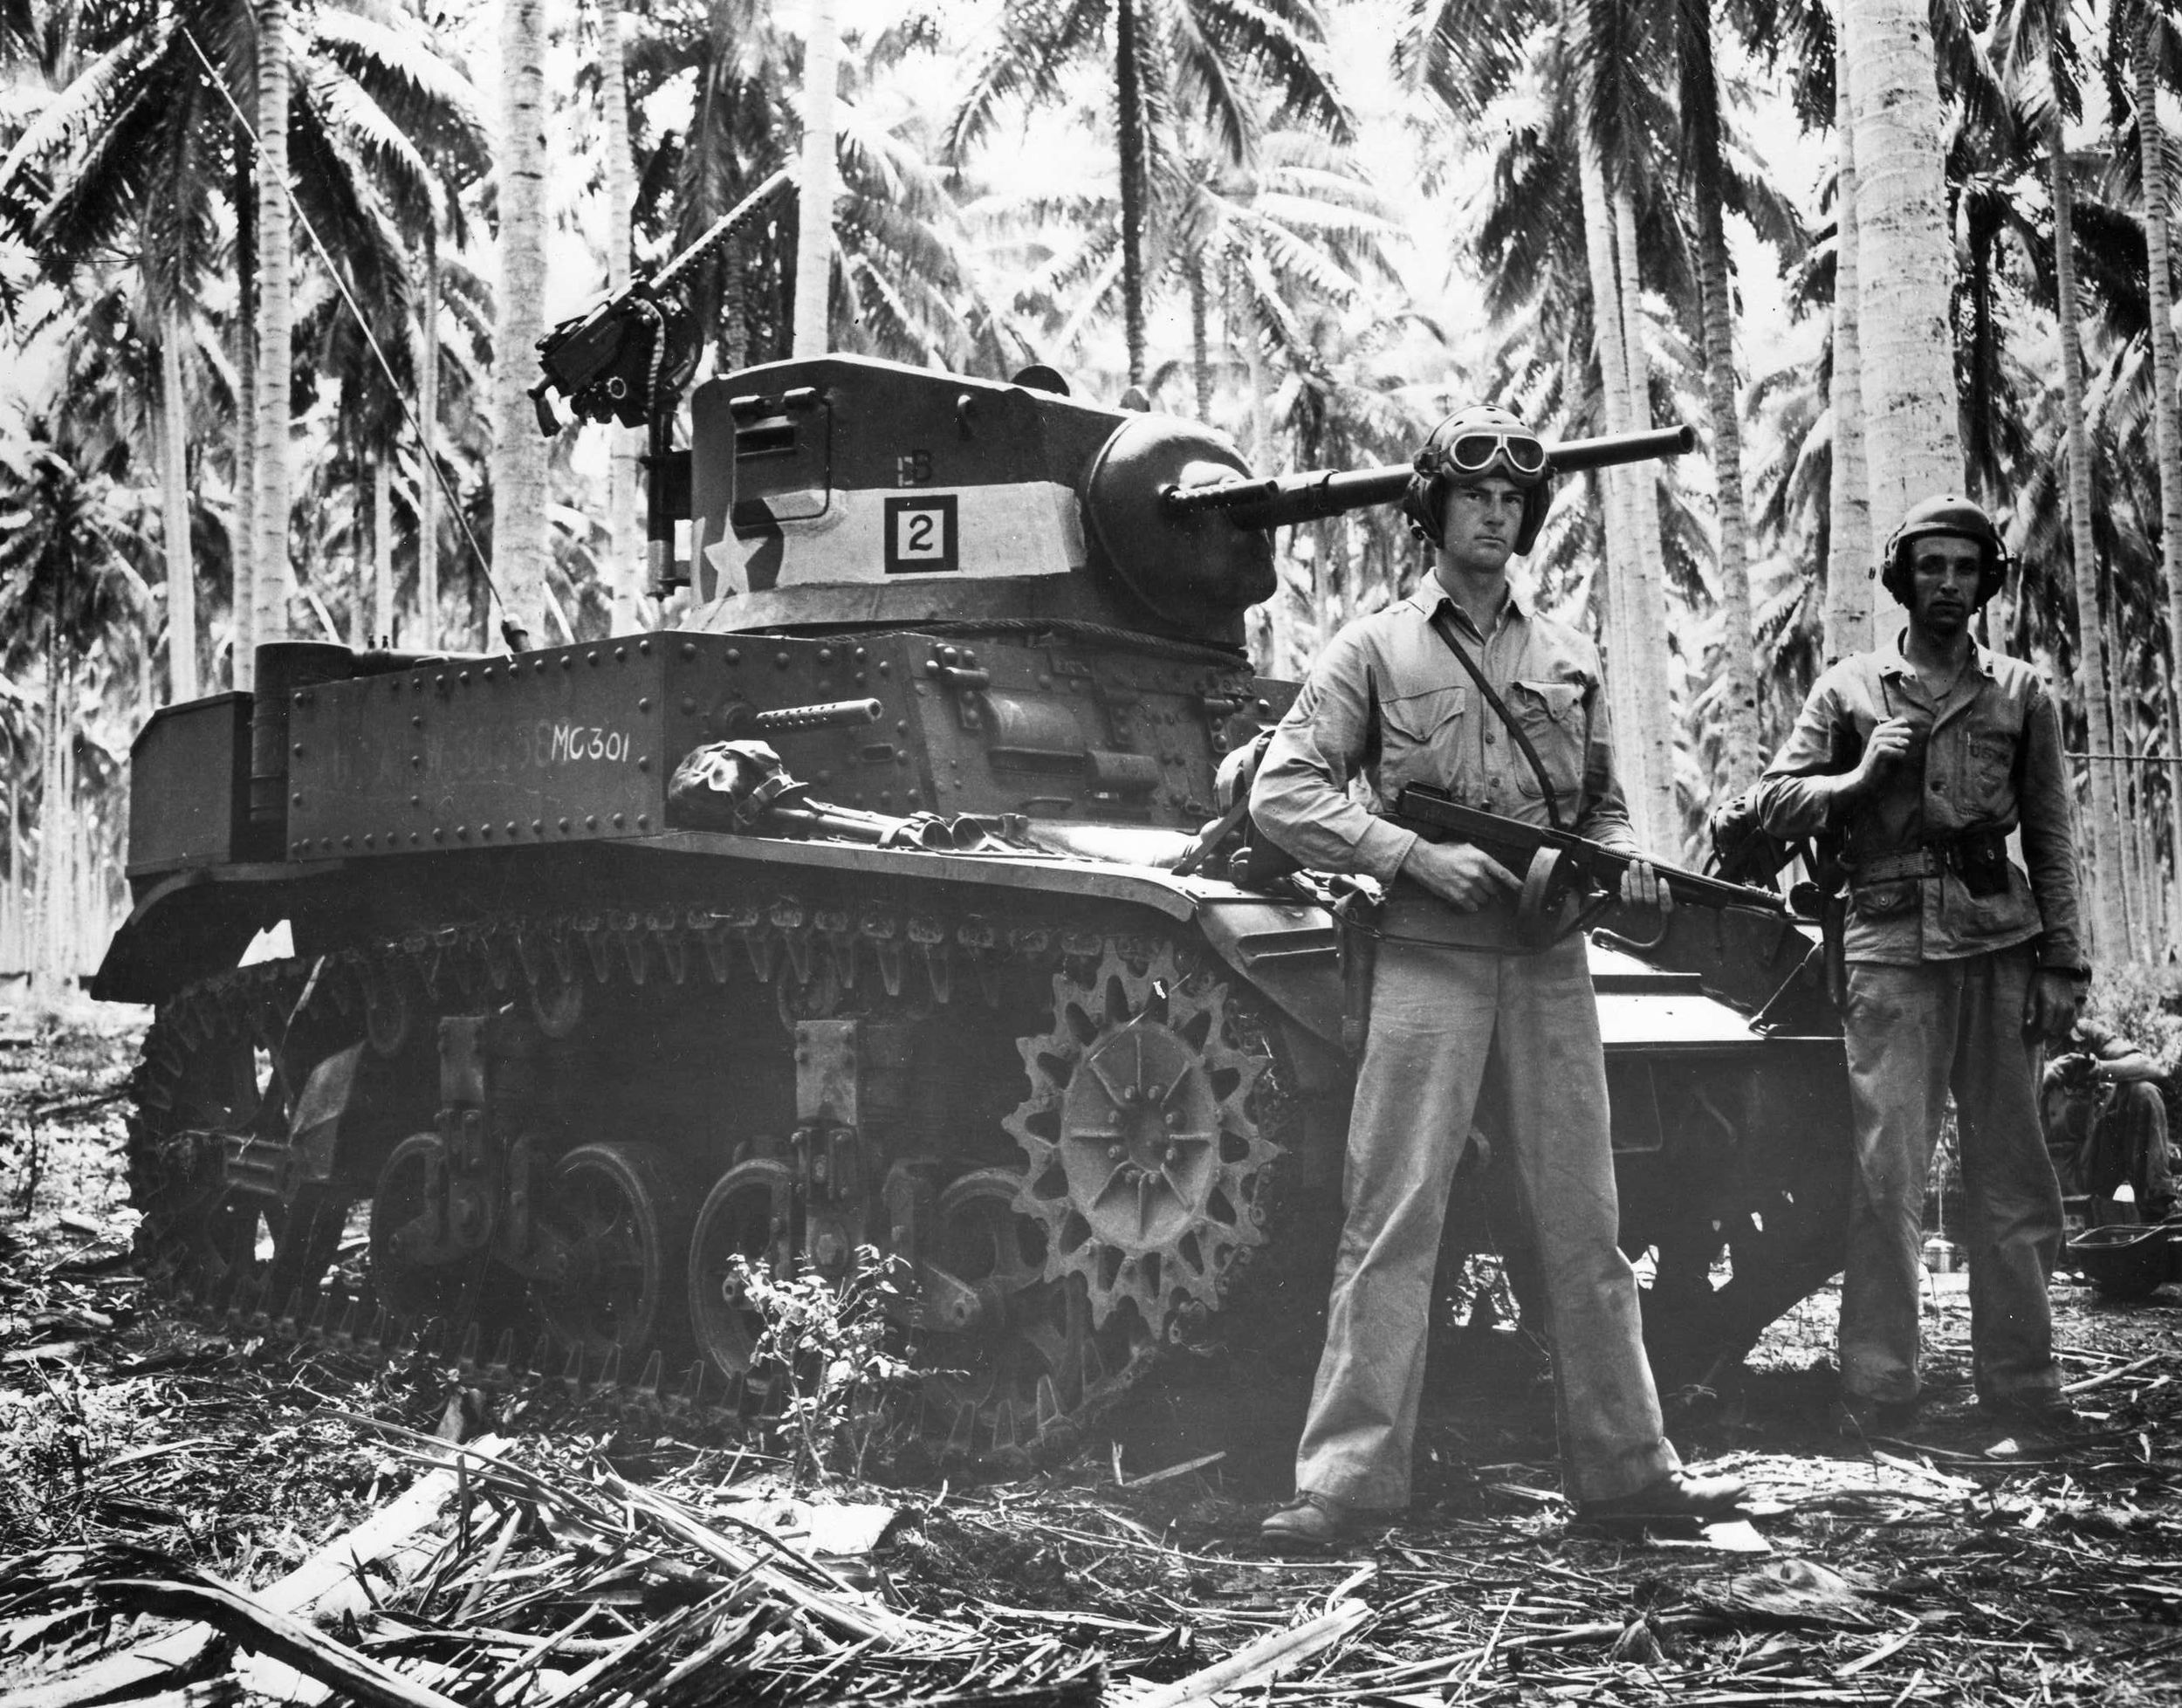 Two American tankers, one of them holding a Thompson submachine gun, stand beside their Stuart light tank, which had recently participated in the fighting at the Tenaru River. U.S. firepower, particularly tanks and artillery, played a pivotal role in the victory on the island. (National Archives)